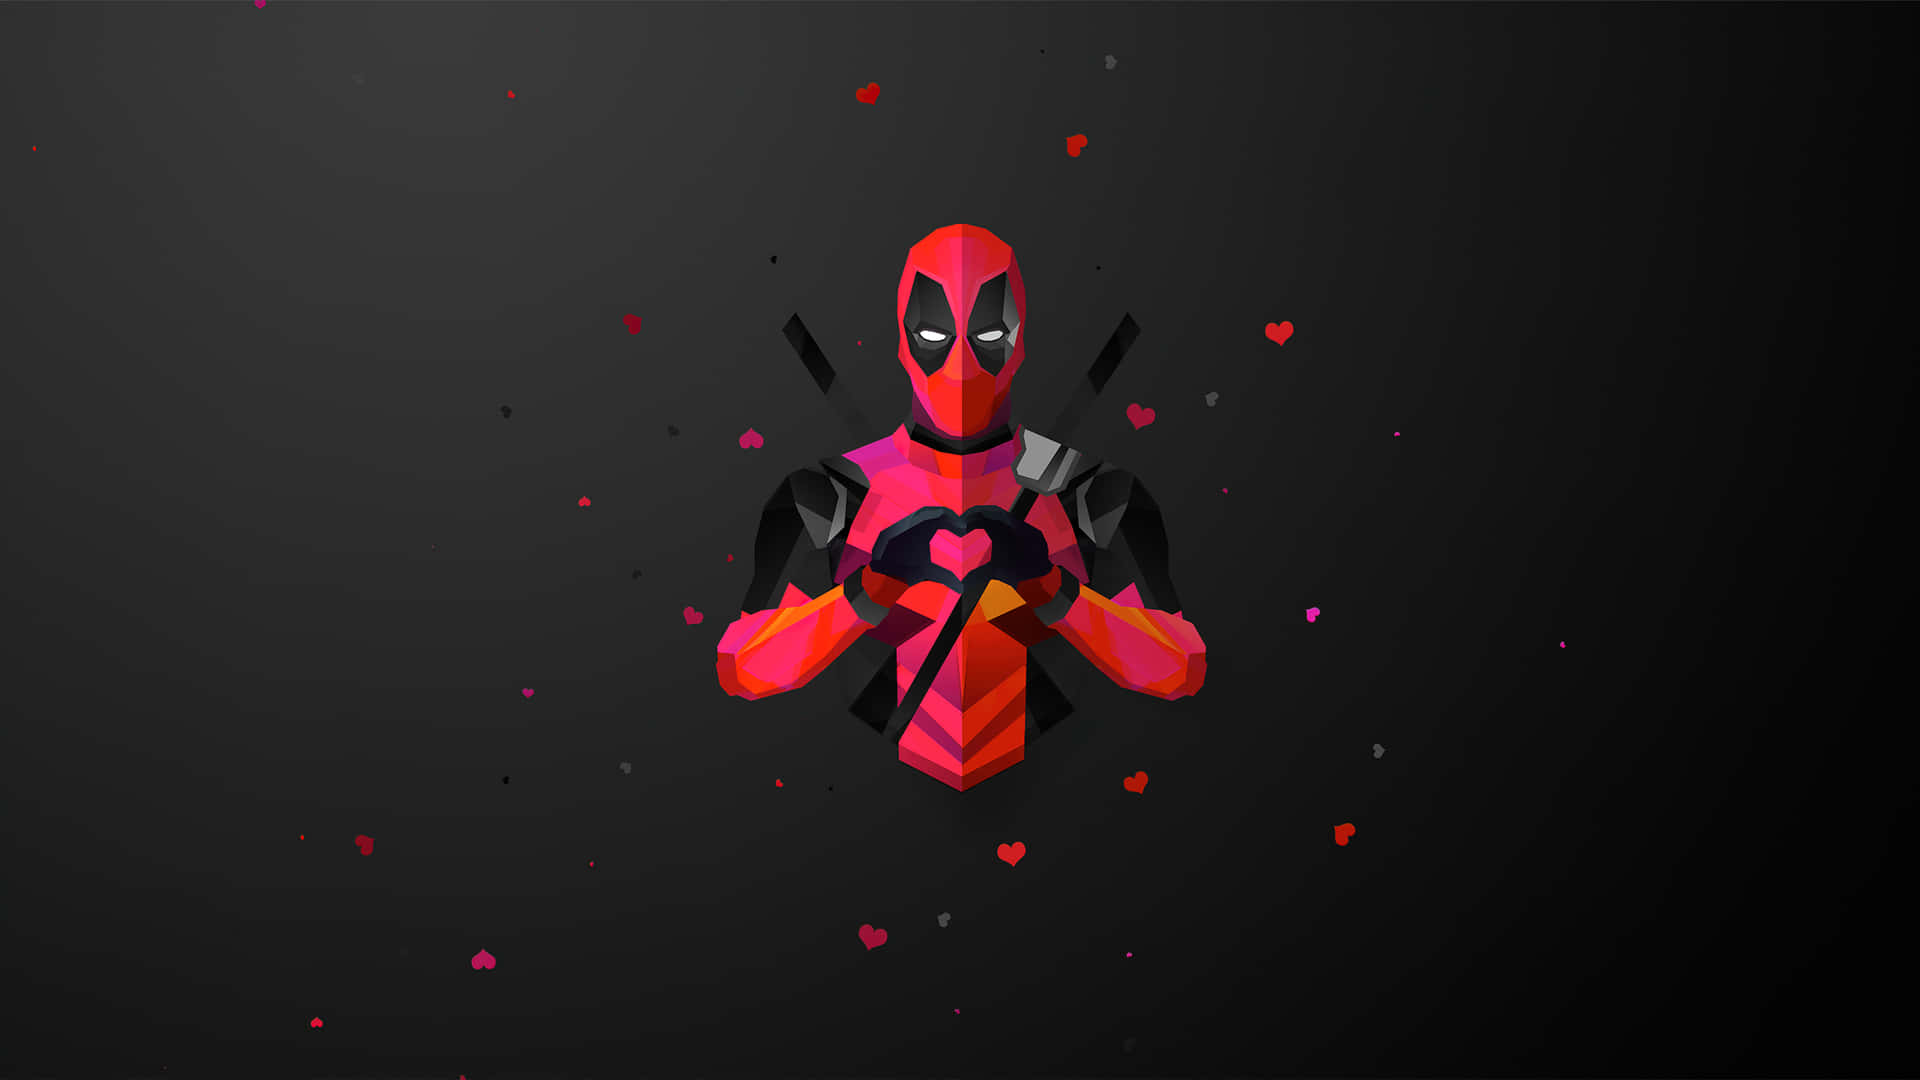 "The Merc with a Mouth, Deadpool, in his all-black outfit, ready for action!" Wallpaper